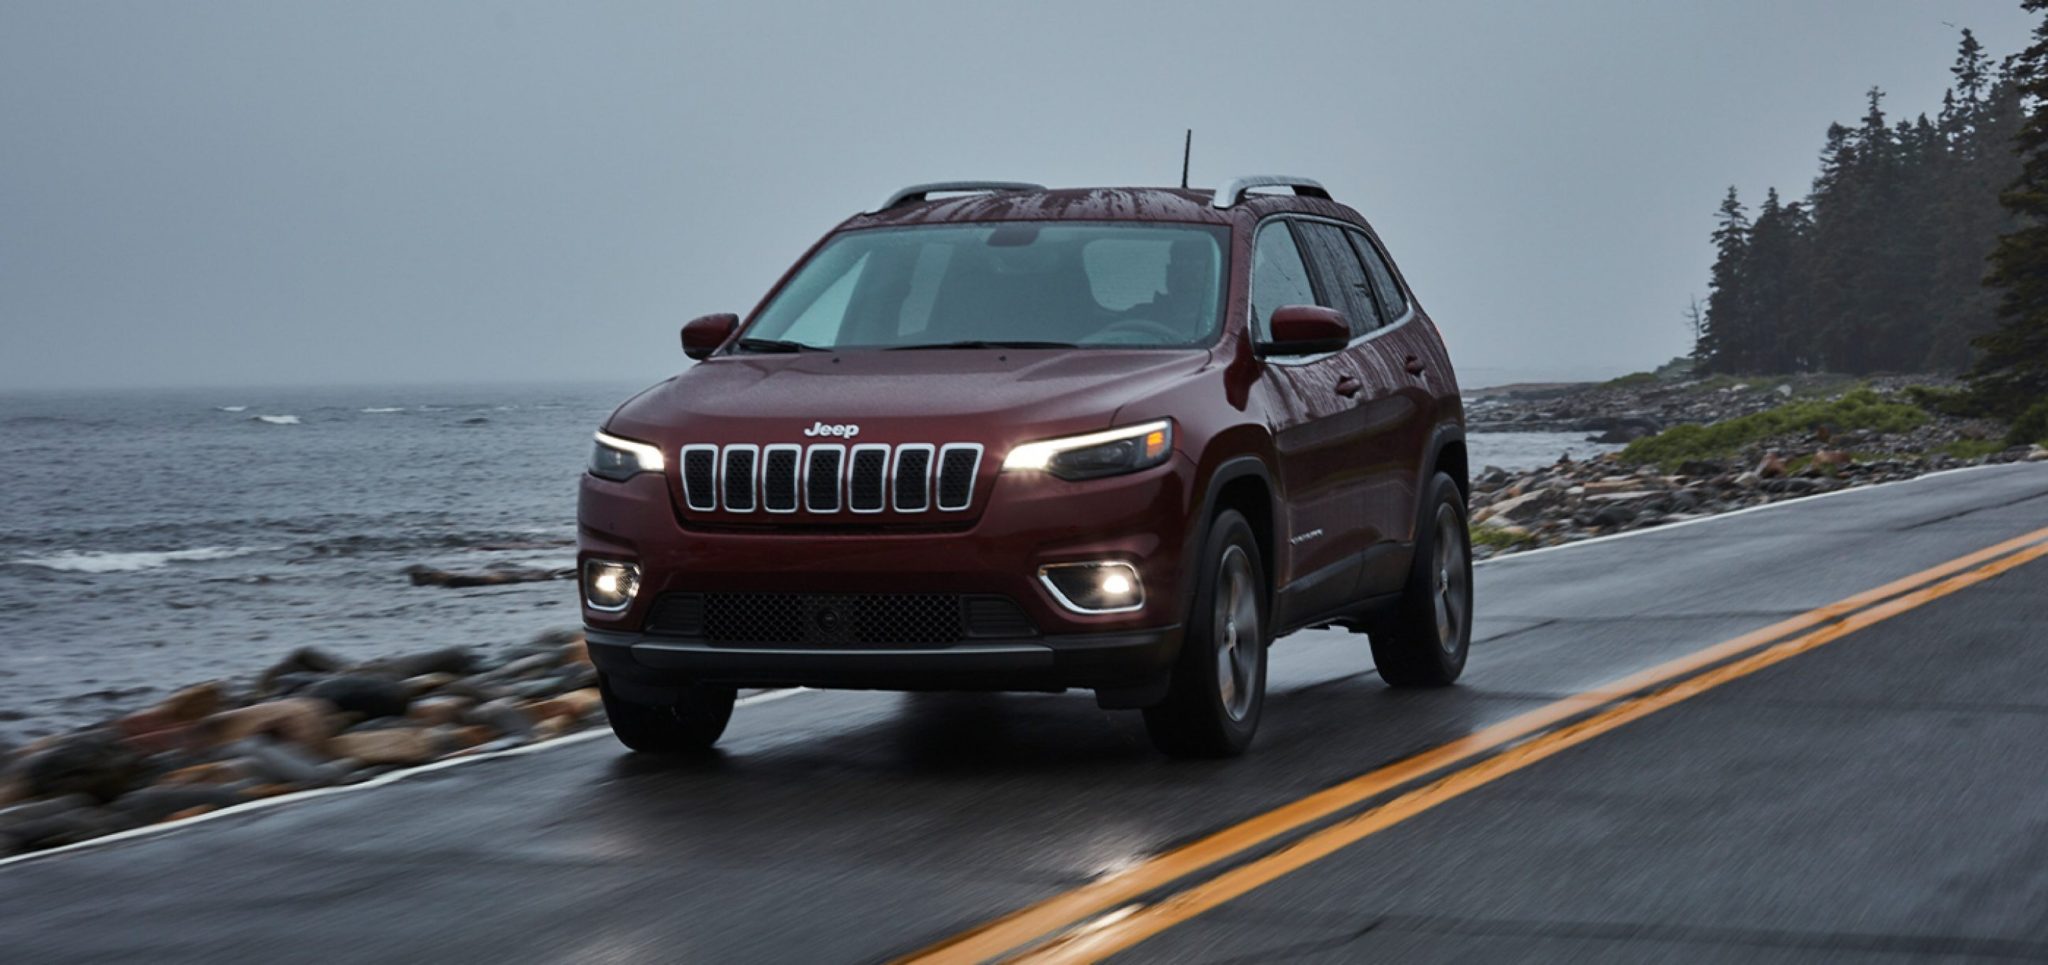 Jeep® Cherokee Lineup Expands With New Latitude LUX Model Towanda